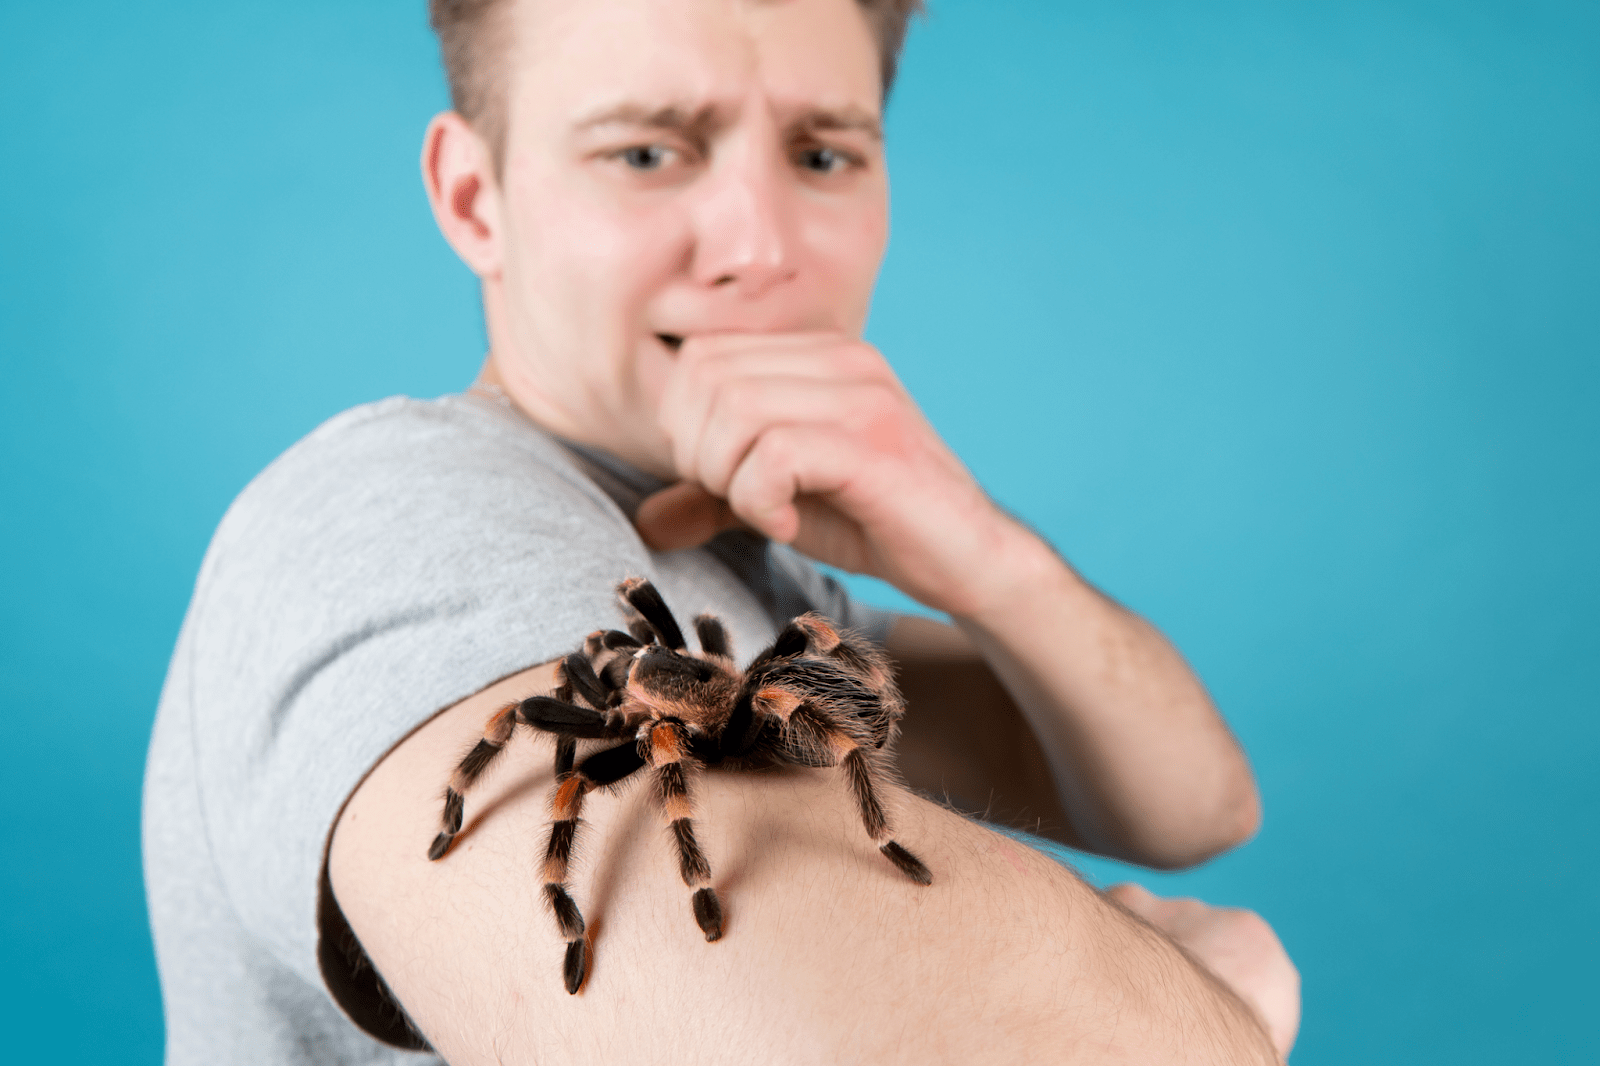 A man is scared and tries not to move, because he has a huge spider sitting on his arm